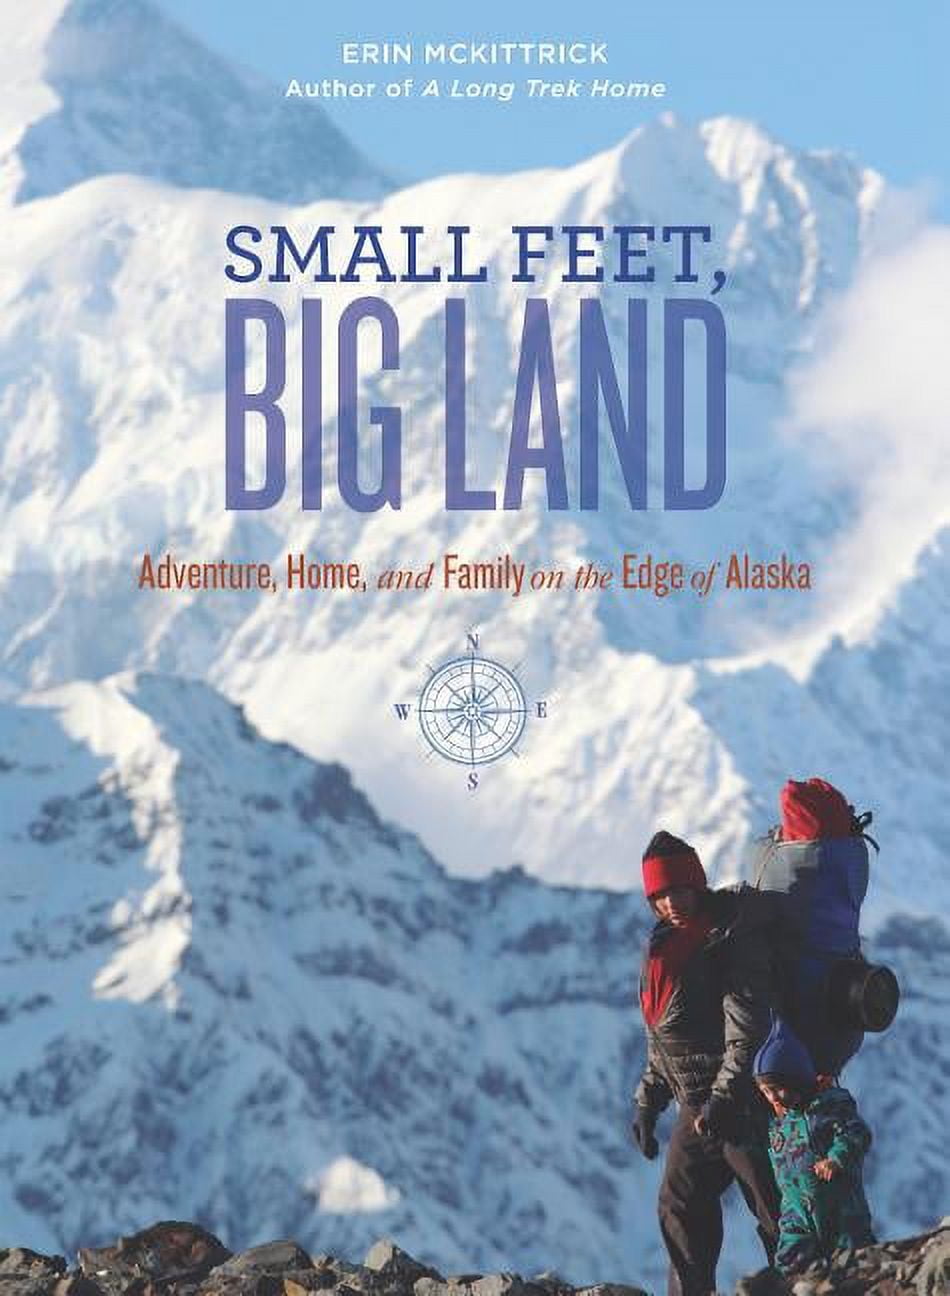 Small　Big　and　of　Adventure,　Alaska　on　Feet,　Edge　Family　Land　the　Home,　Paperback)